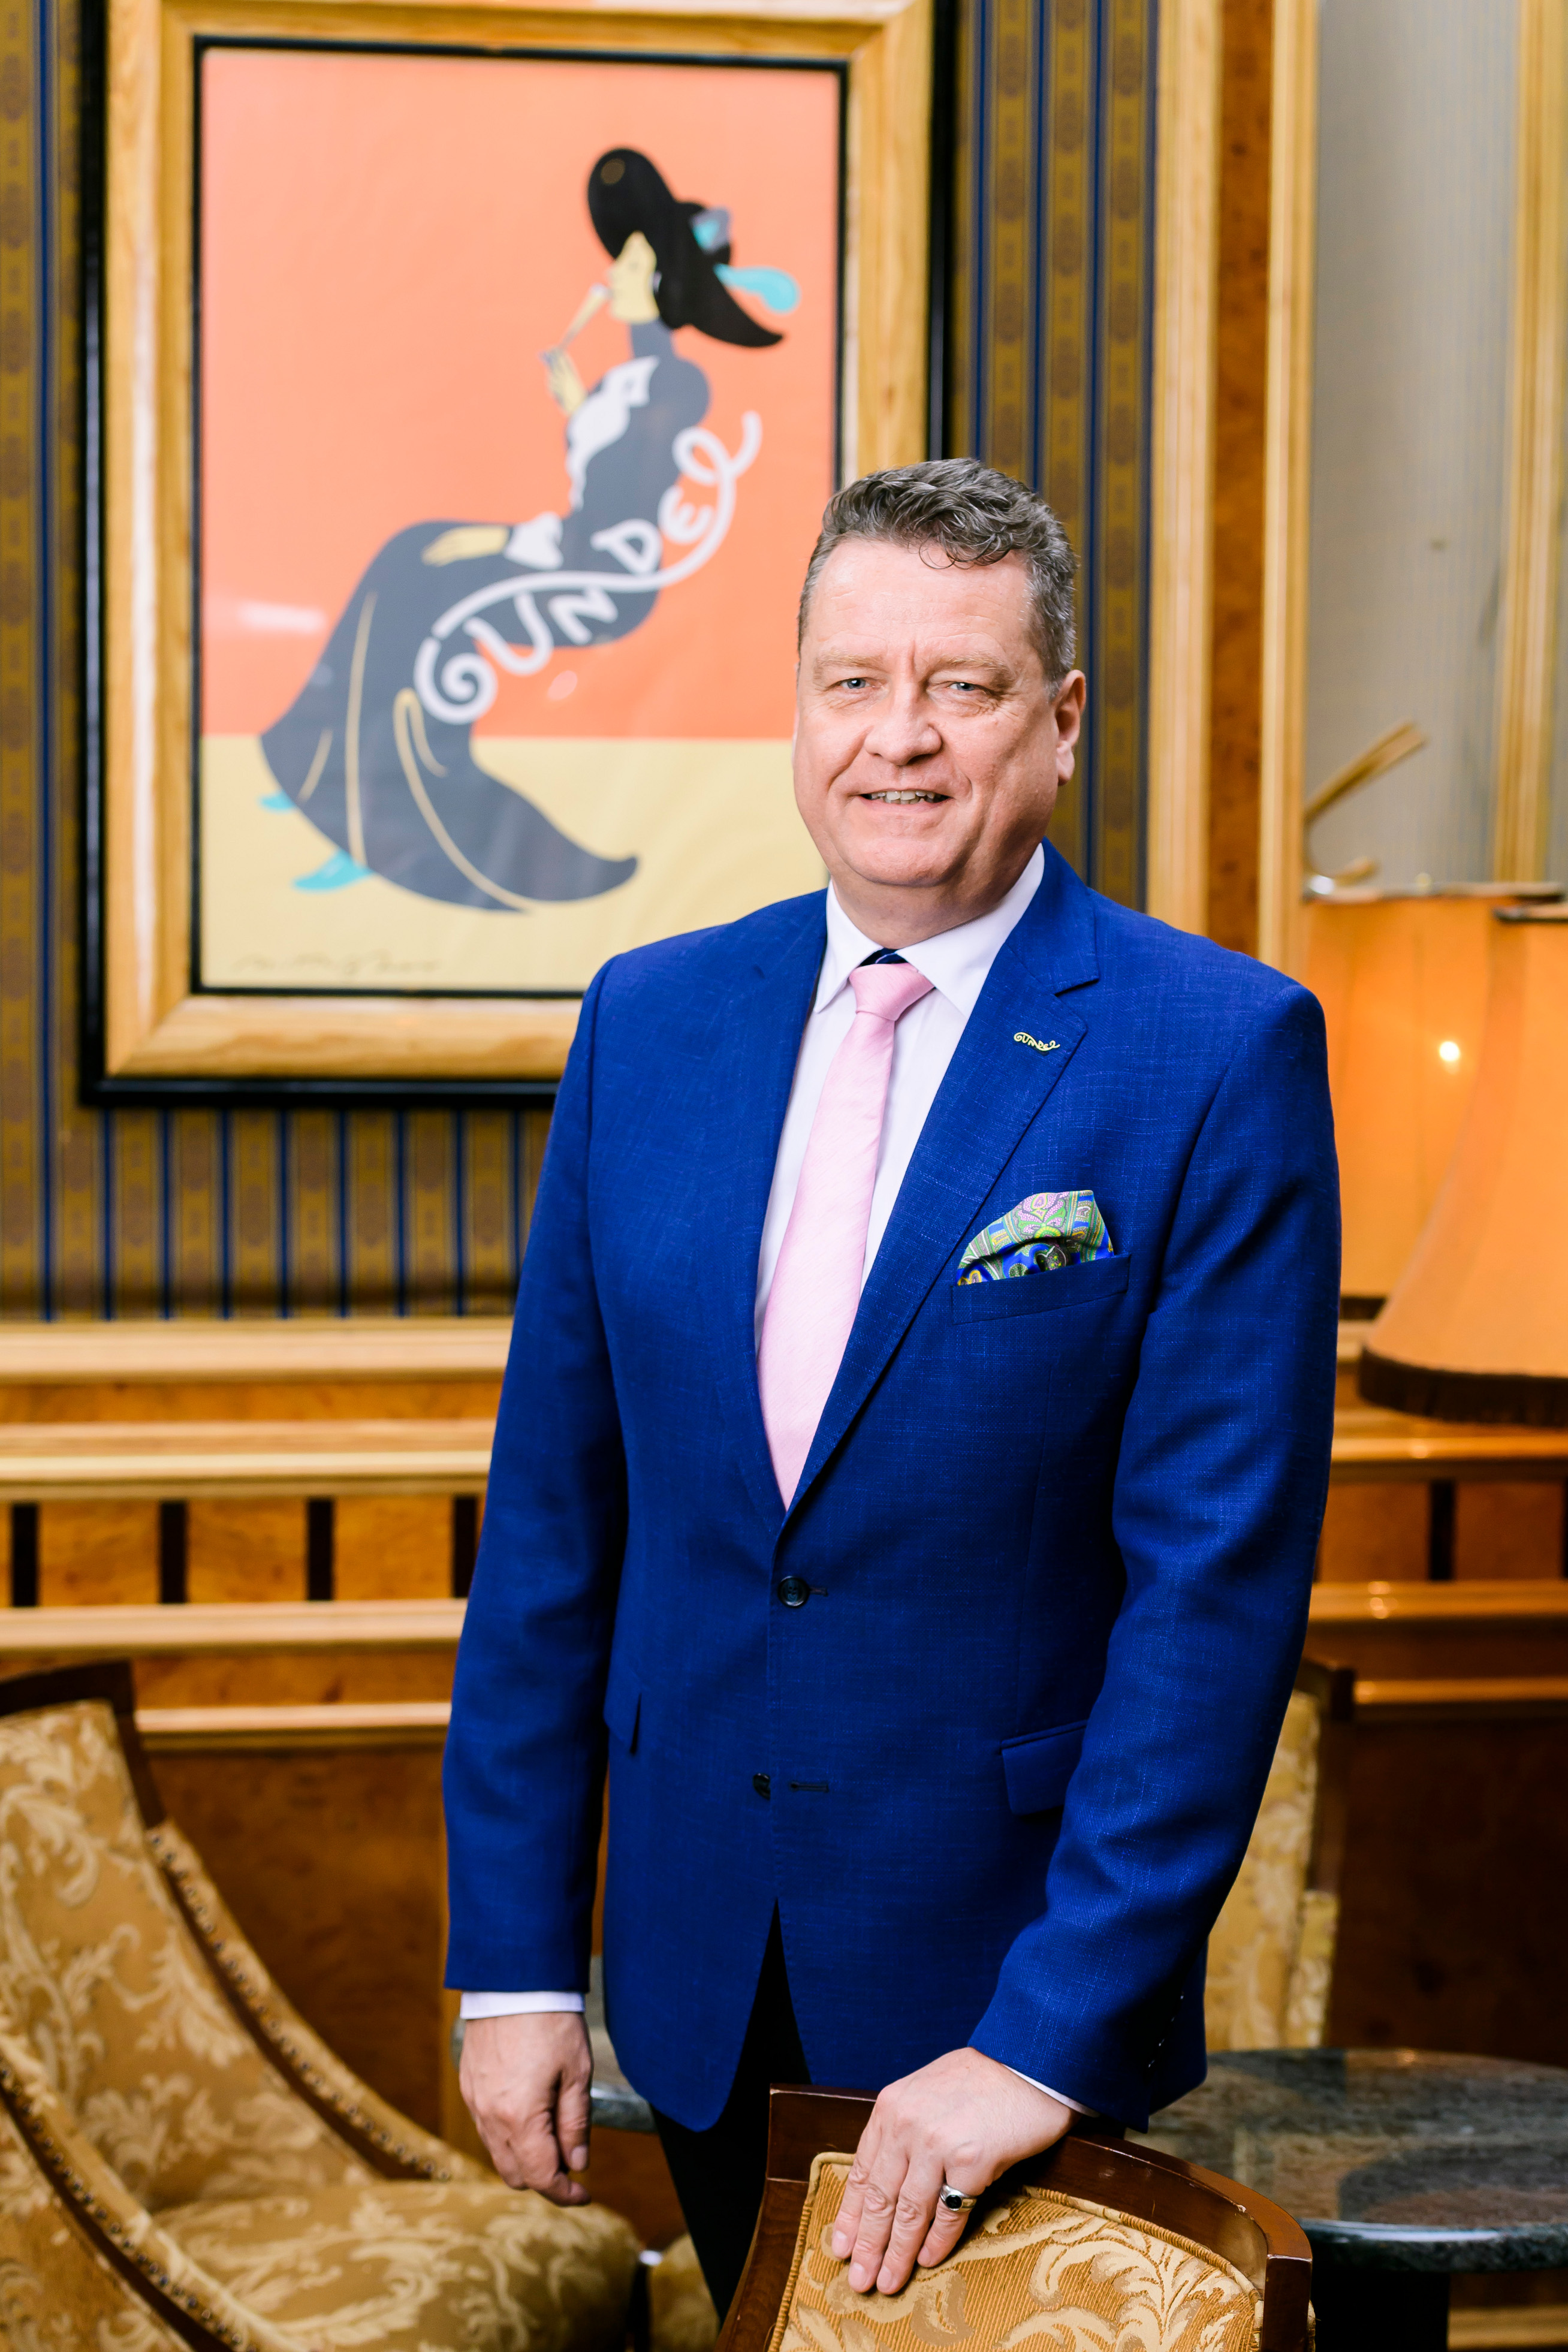 Peter Knoll, General Manager, Hilton Budapest